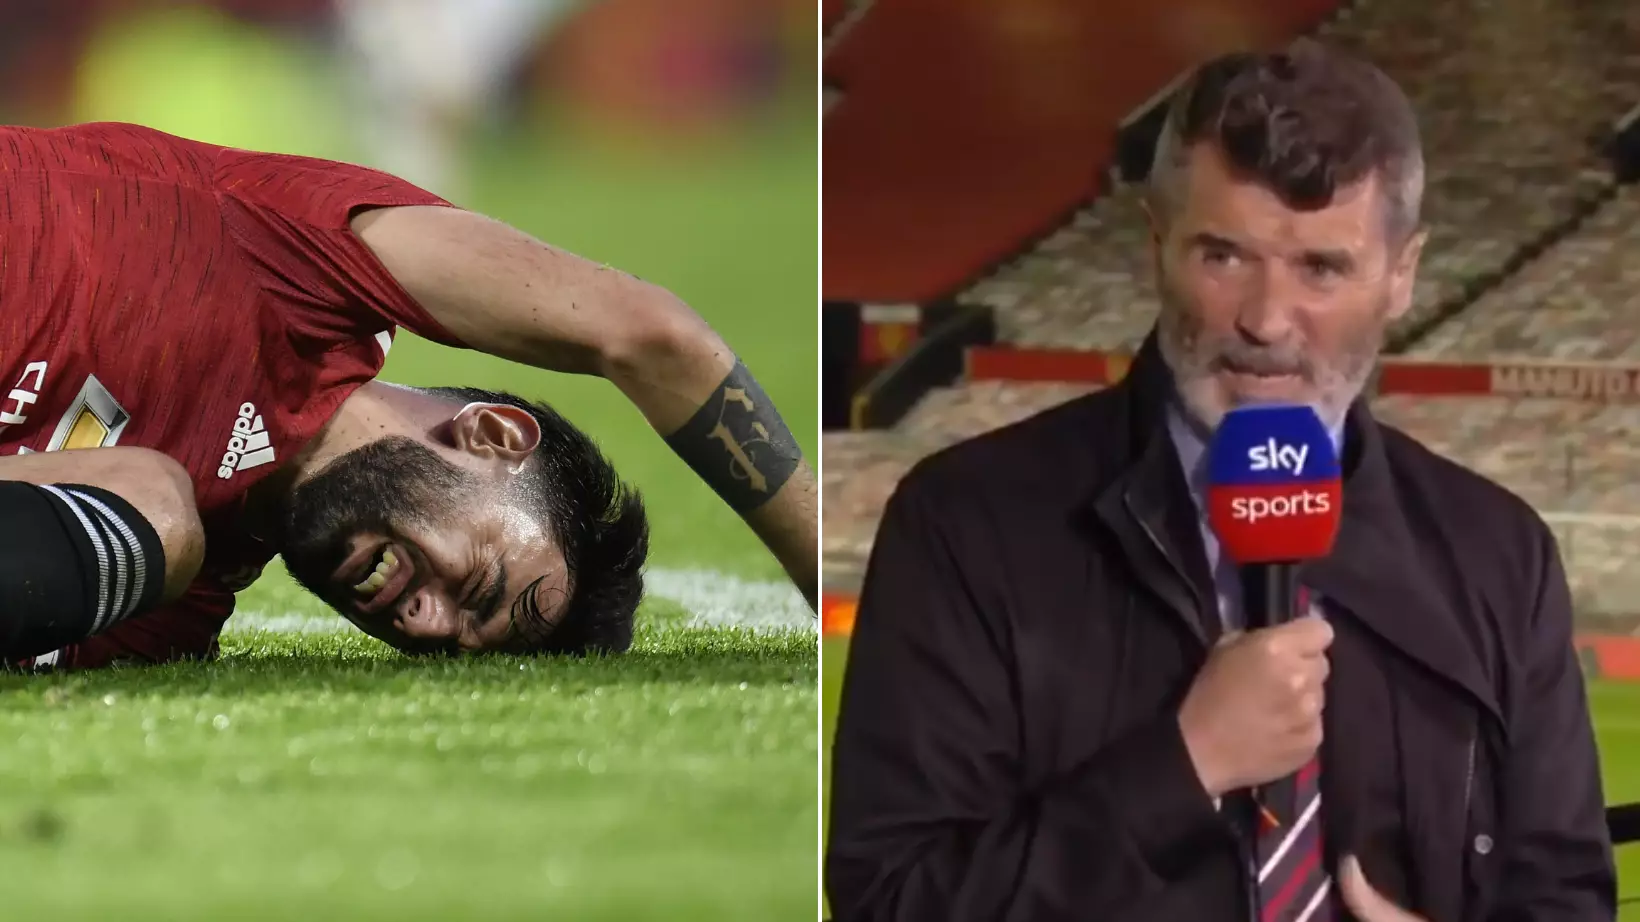 Roy Keane On Bruno Fernandes: "He Spent Half The Time Crying On The Pitch"